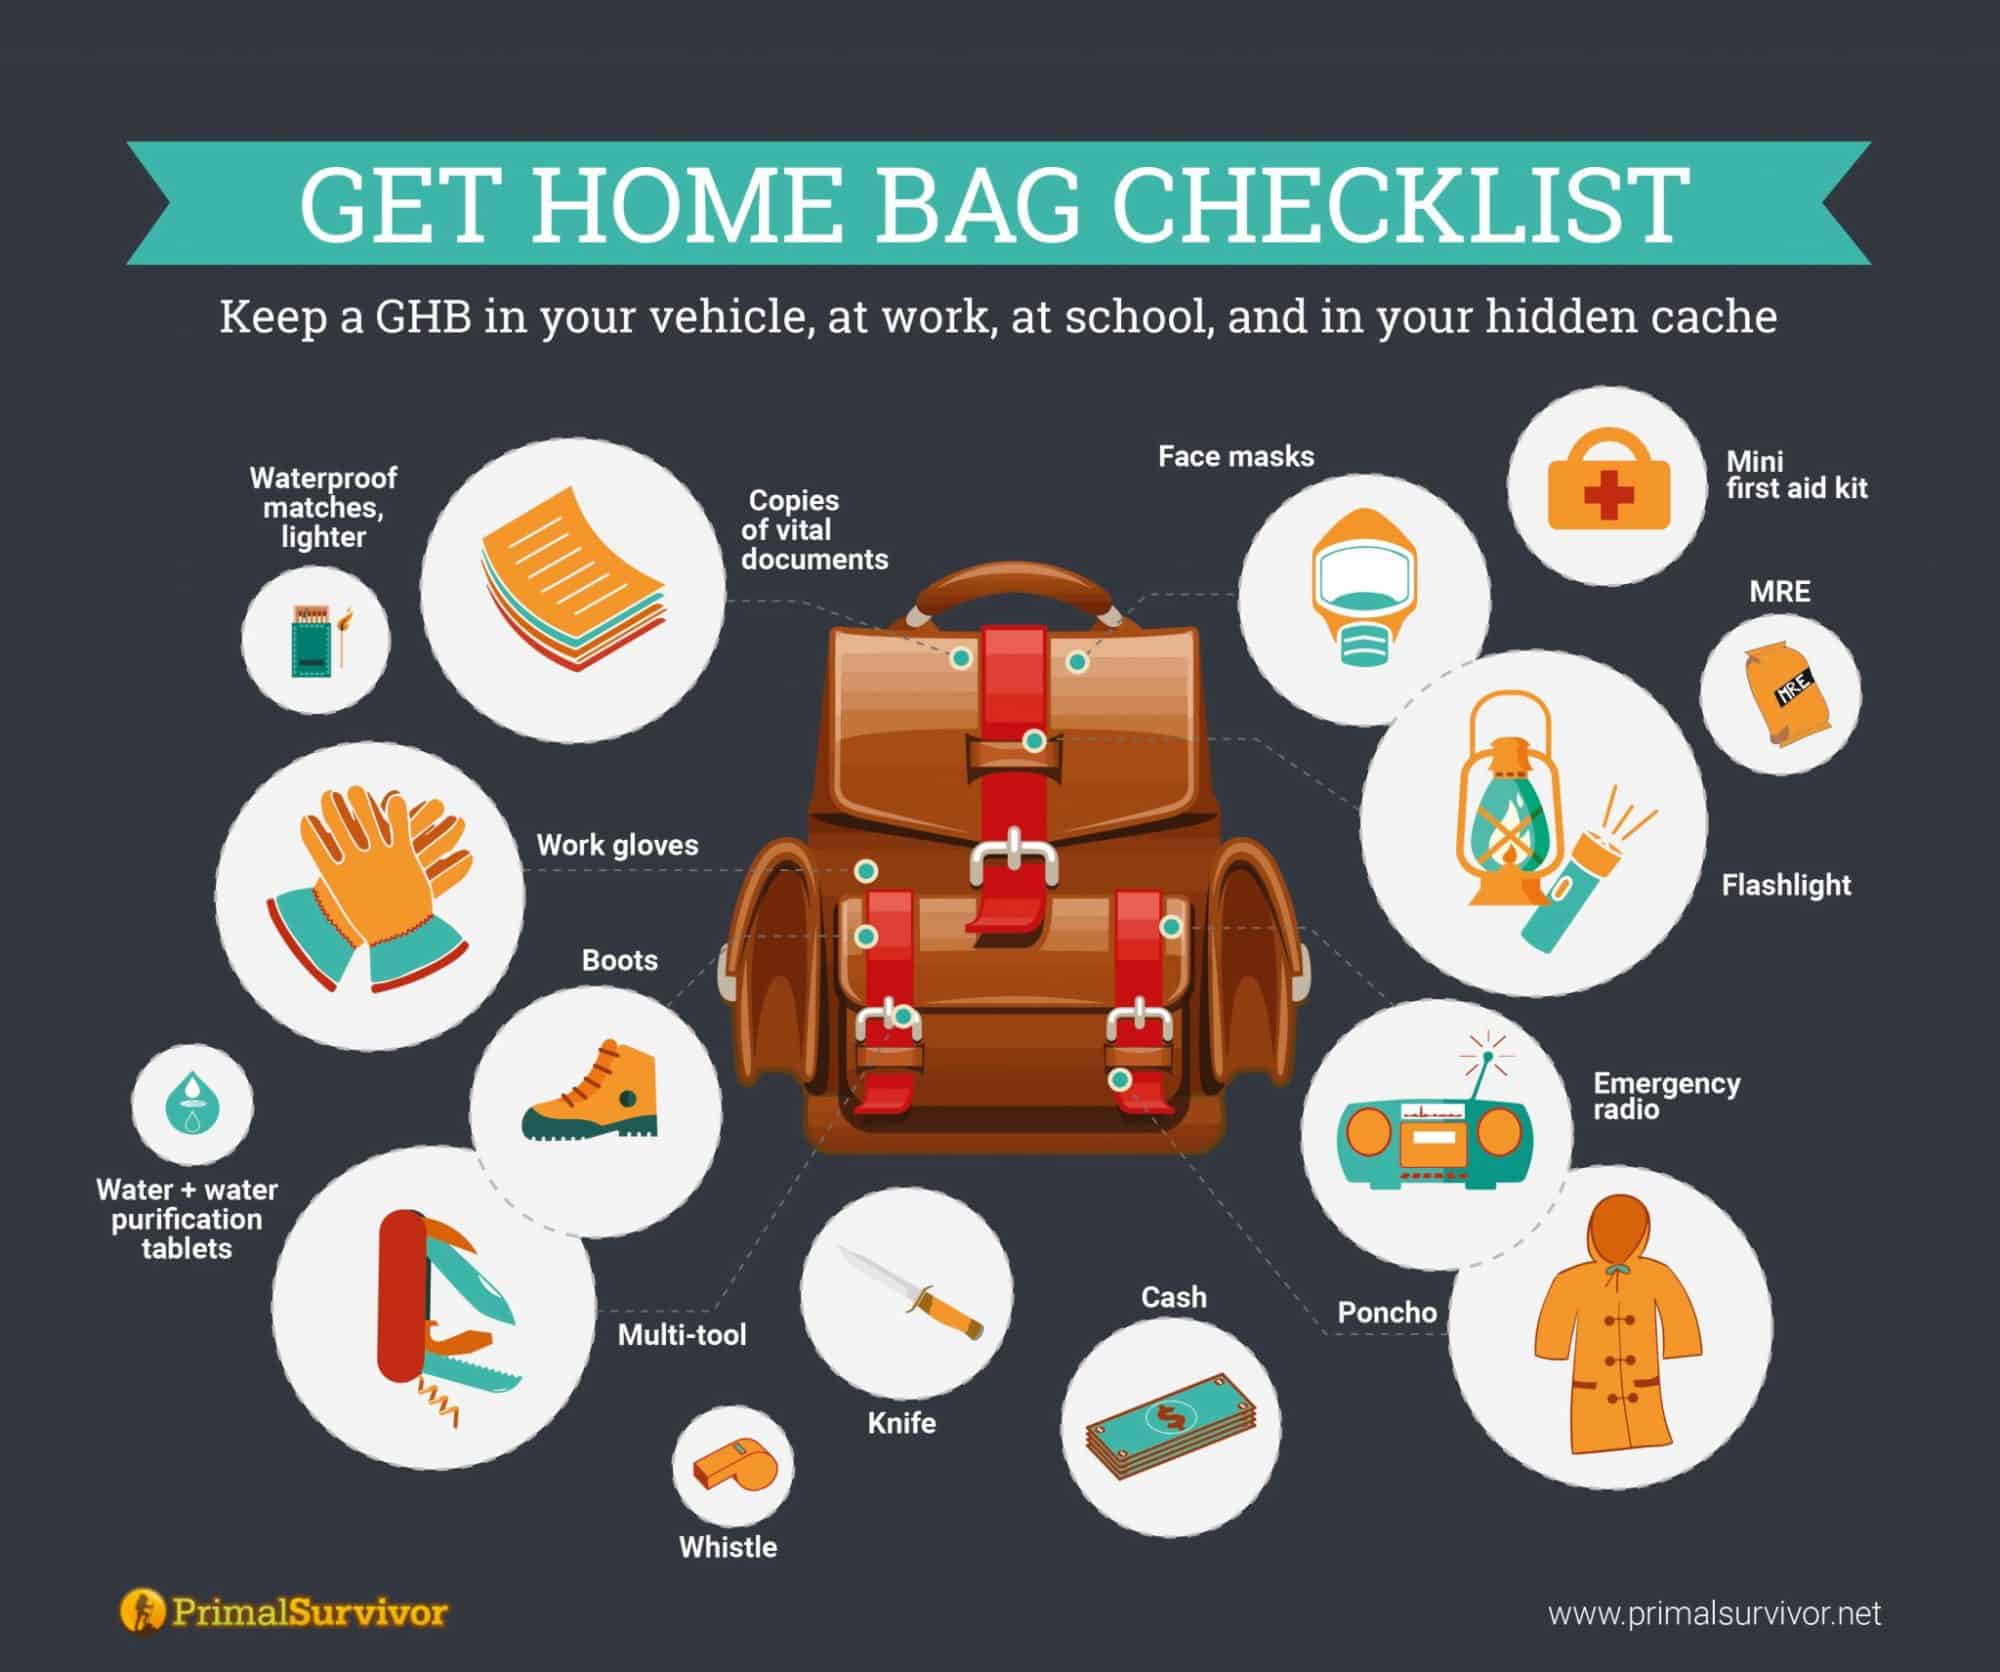 What Must a Gal Have in Her Get-Home-Bag? (What is a Get Home Bag and a  Checklist for What You Need) — All Posts Healing Harvest Homestead